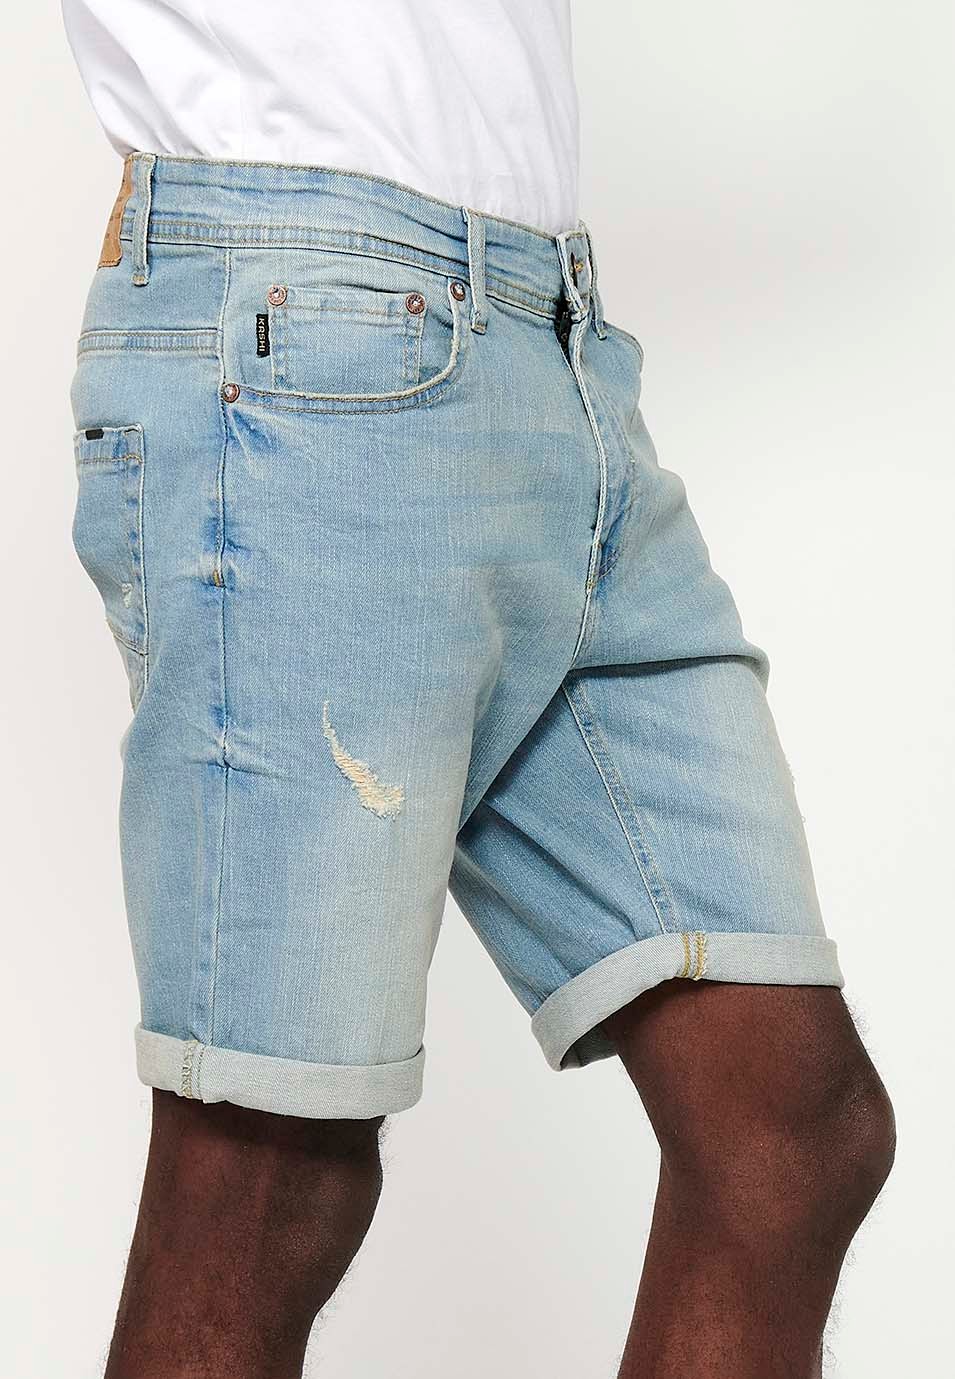 Shorts with turn-up finish and front closure with zipper and button and five pockets, one blue pocket pocket for men 9